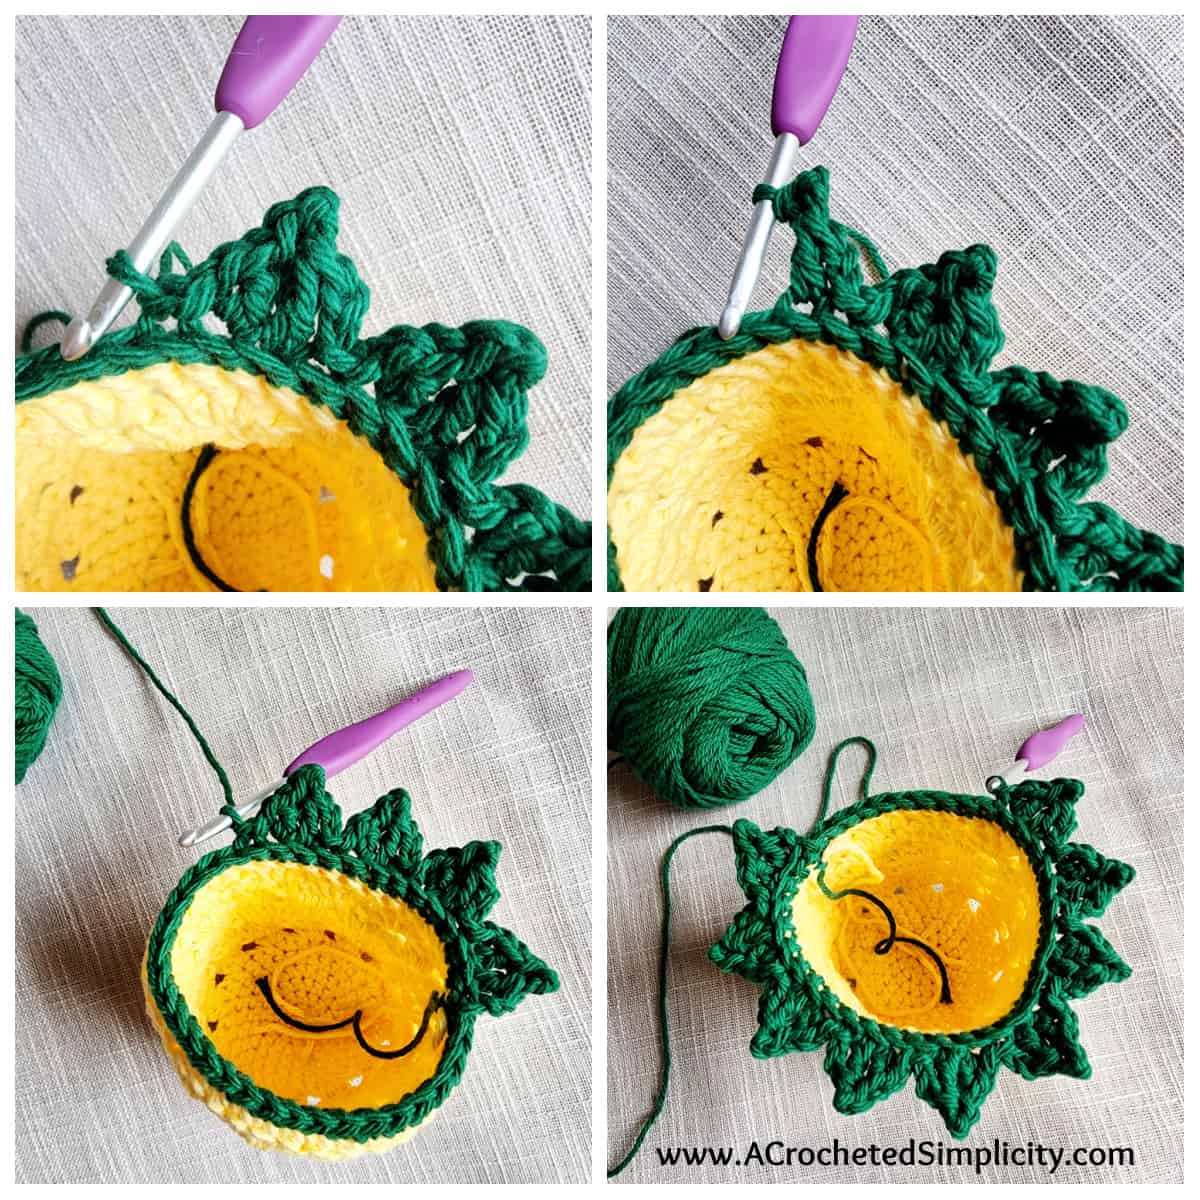 How to crochet leaves on a pineapple.